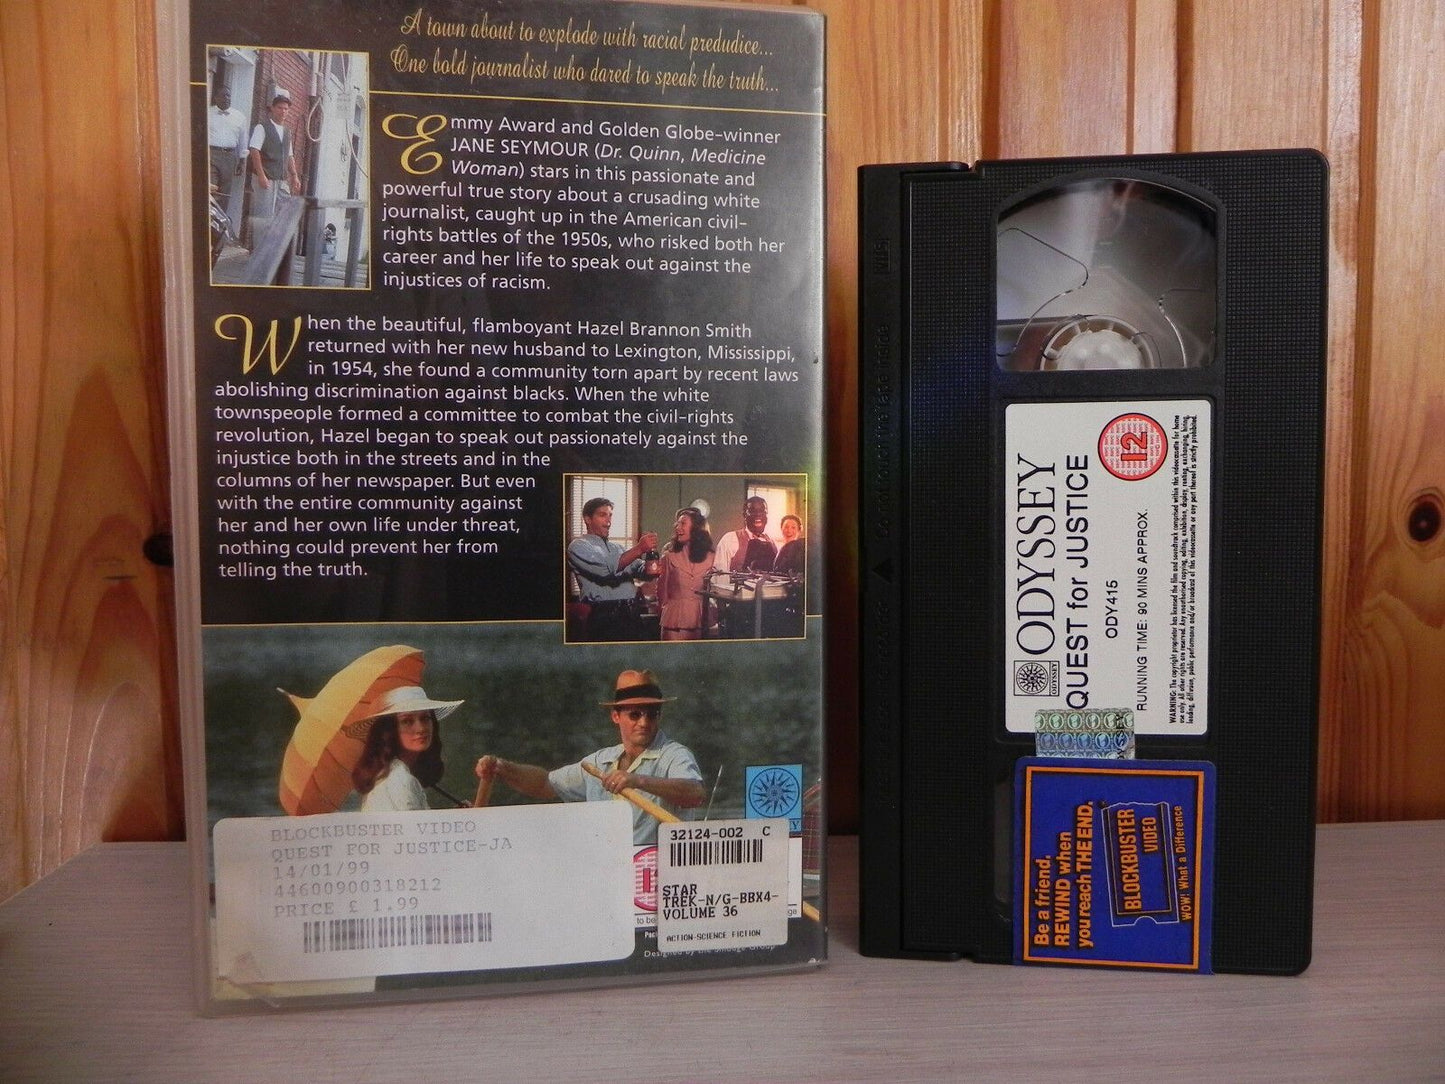 Quest For Justice - Big Box - Odyssey Drama - Ex-Rental Video - True Story - VHS-